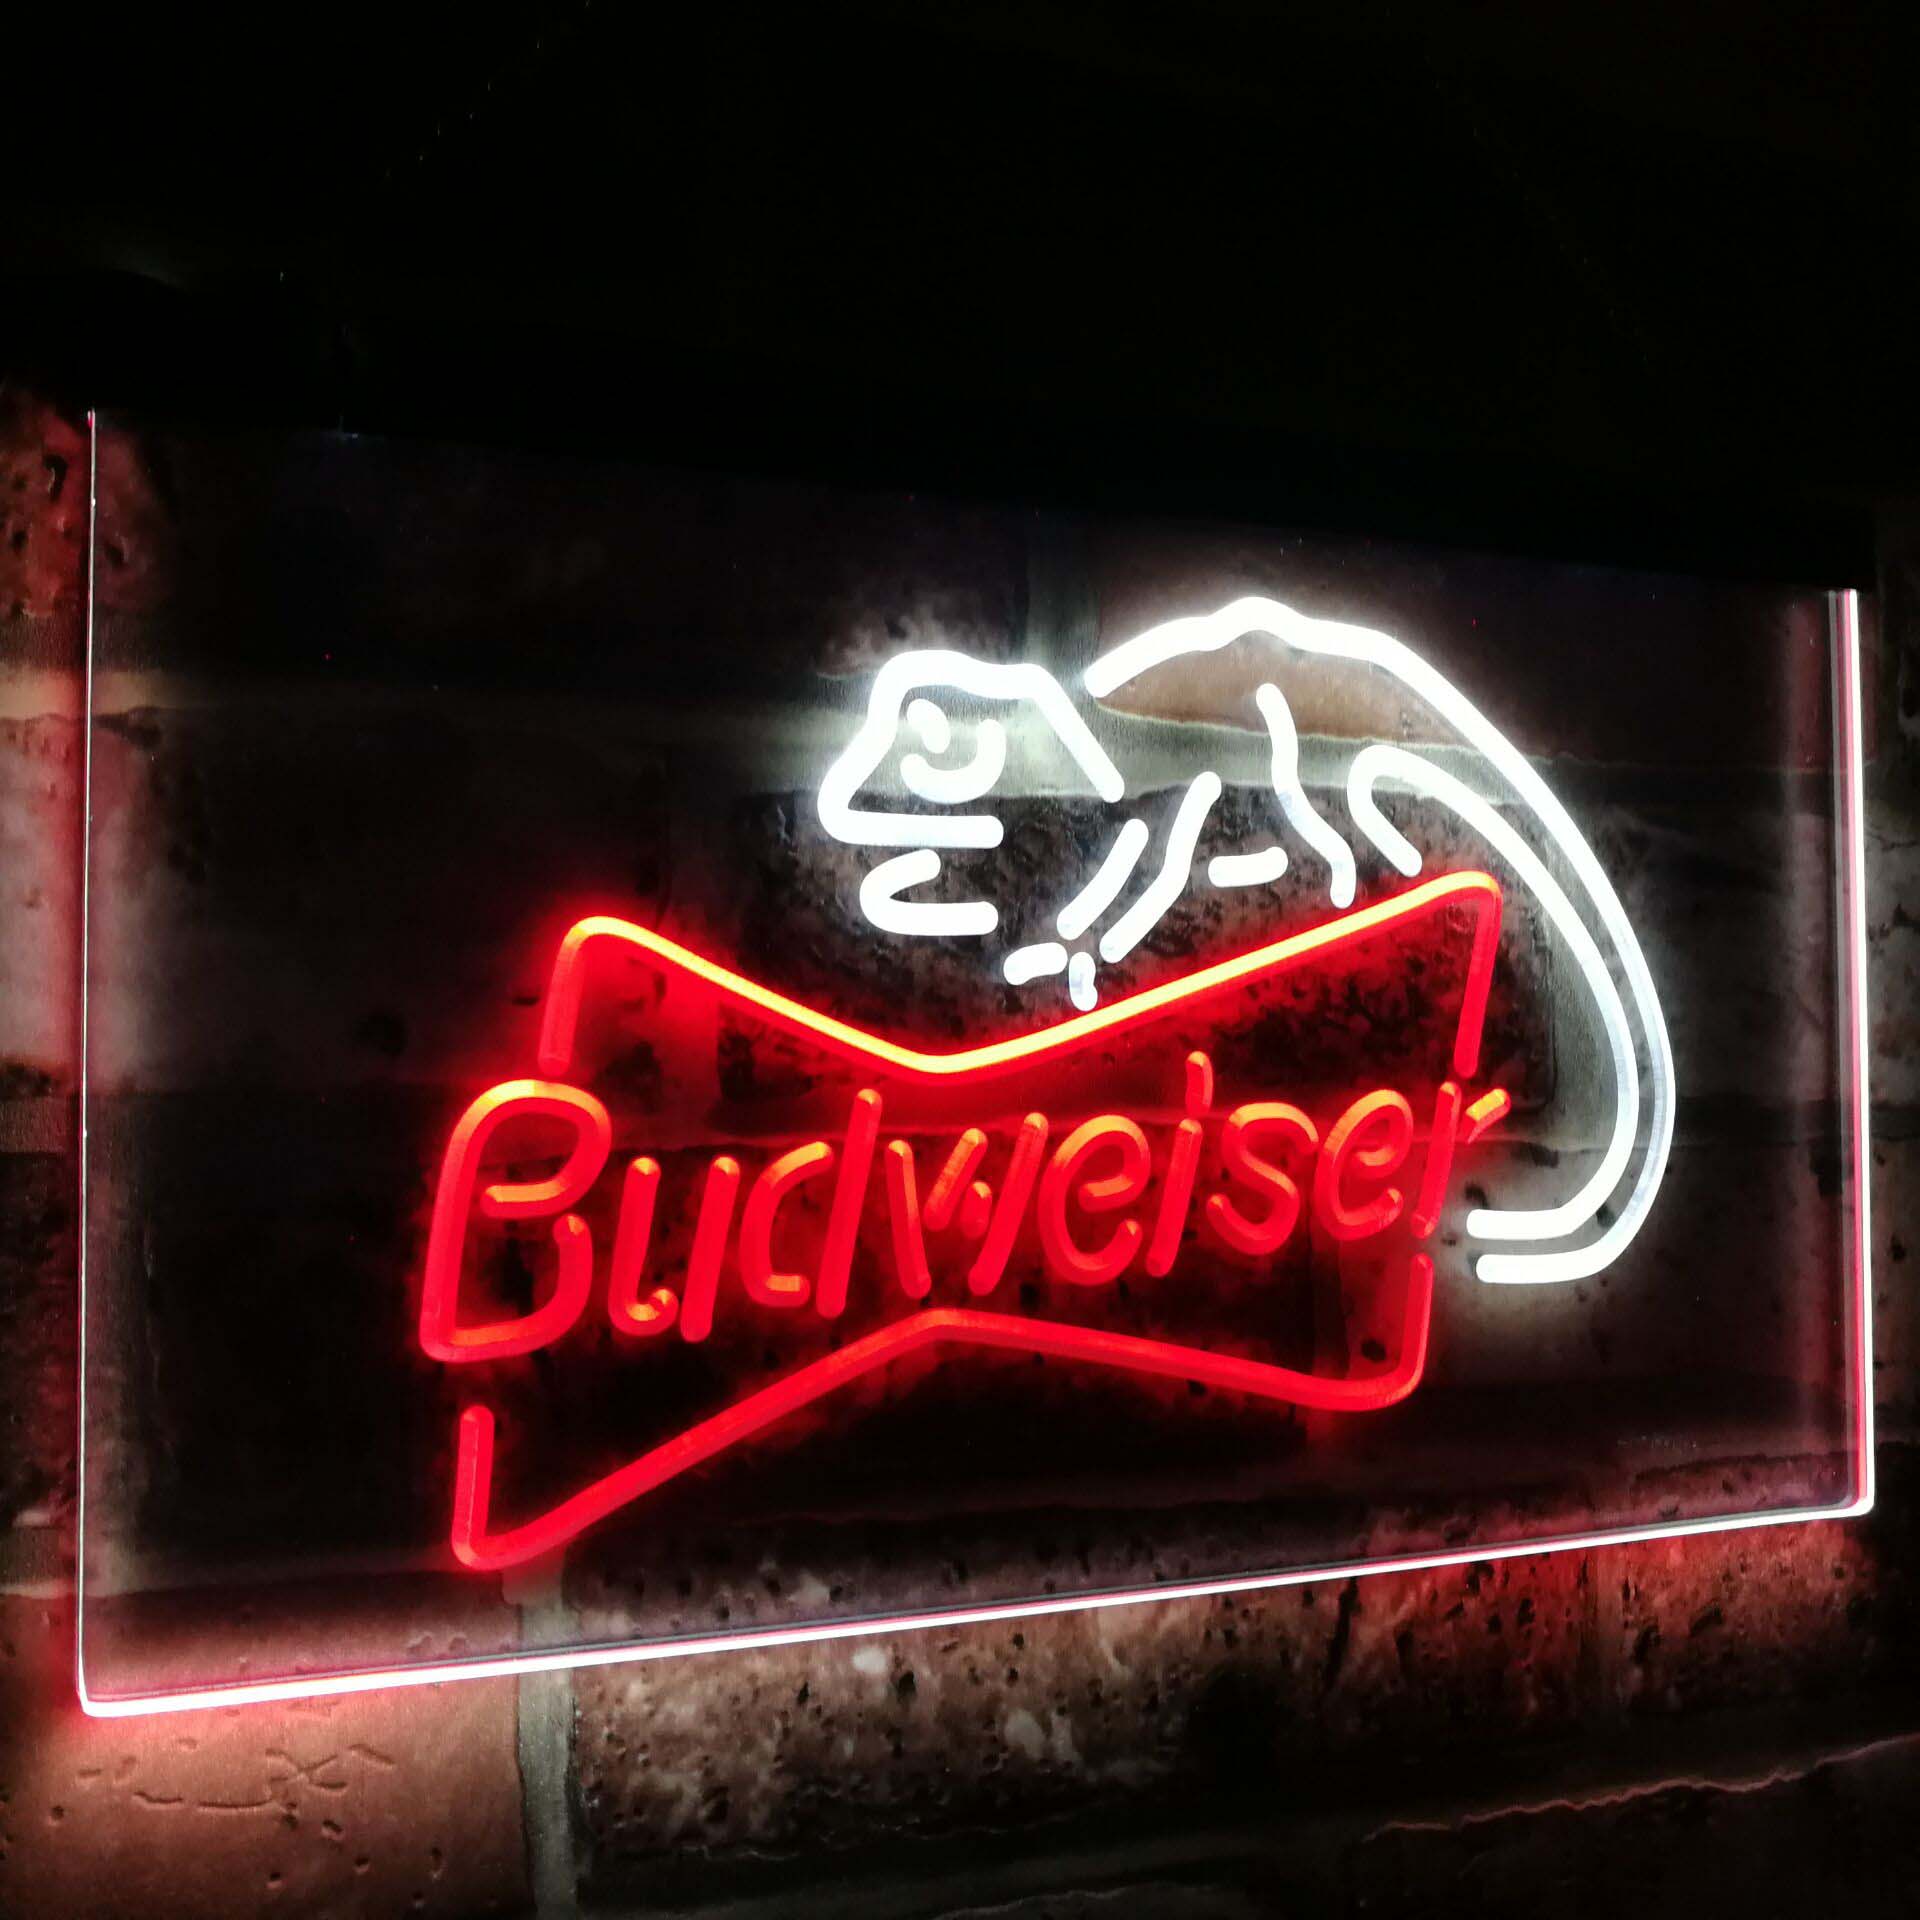 Budweiser Lizard  Bar Decoration Gift Dual Color Led Neon Light Signs st6-a2084 by Woody Signs Co. - Handmade Crafted Unique Wooden Creative